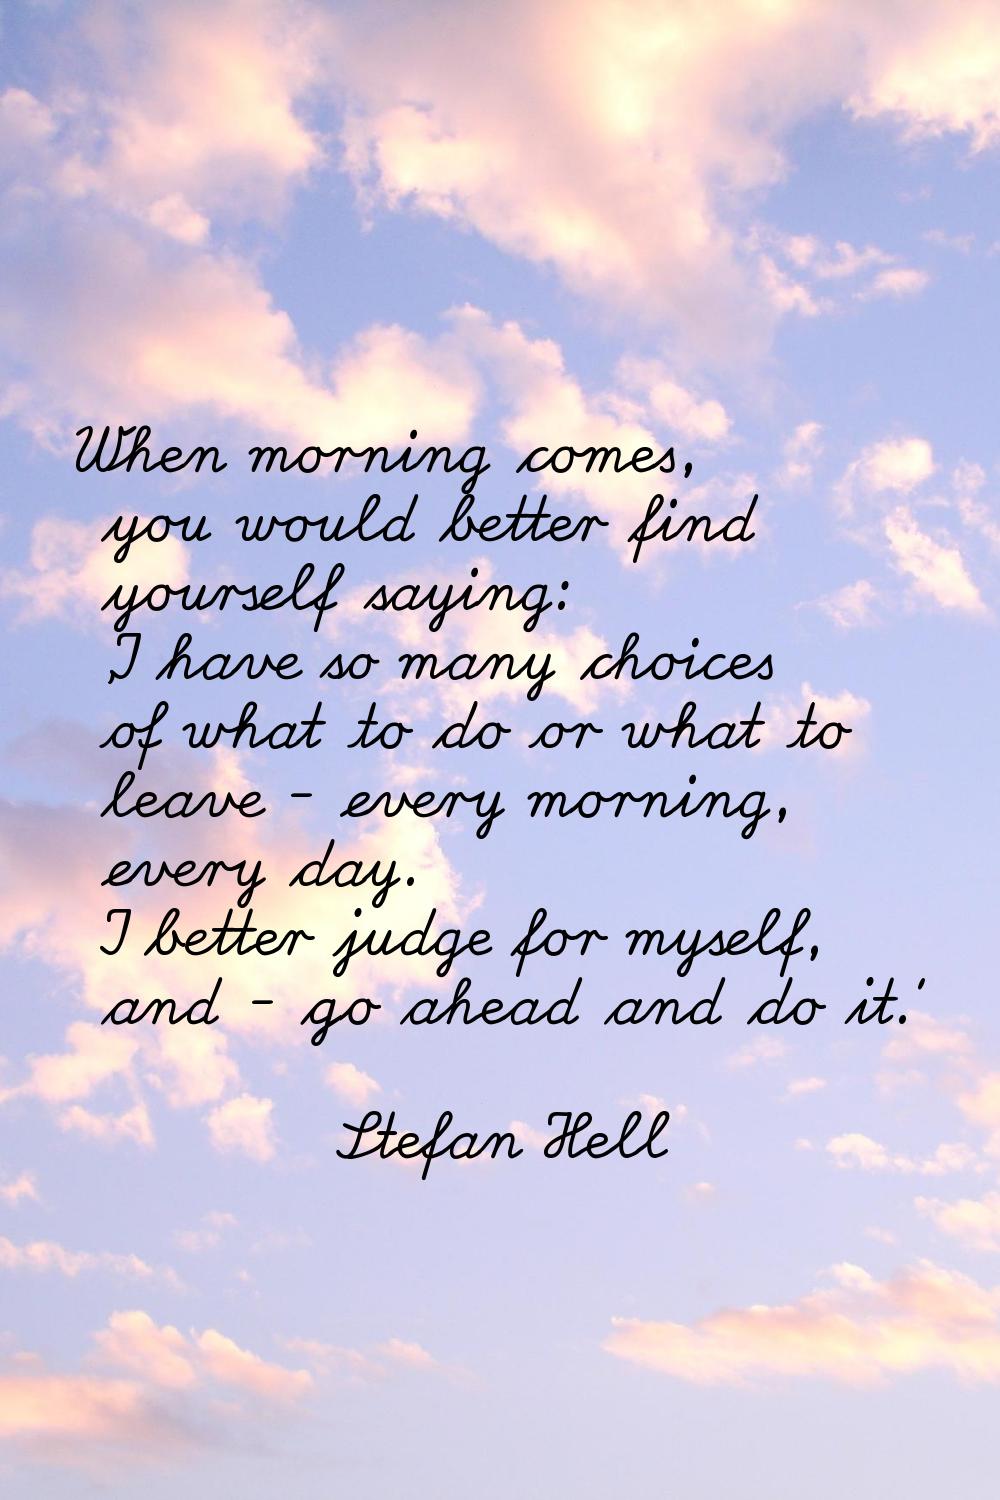 When morning comes, you would better find yourself saying: 'I have so many choices of what to do or